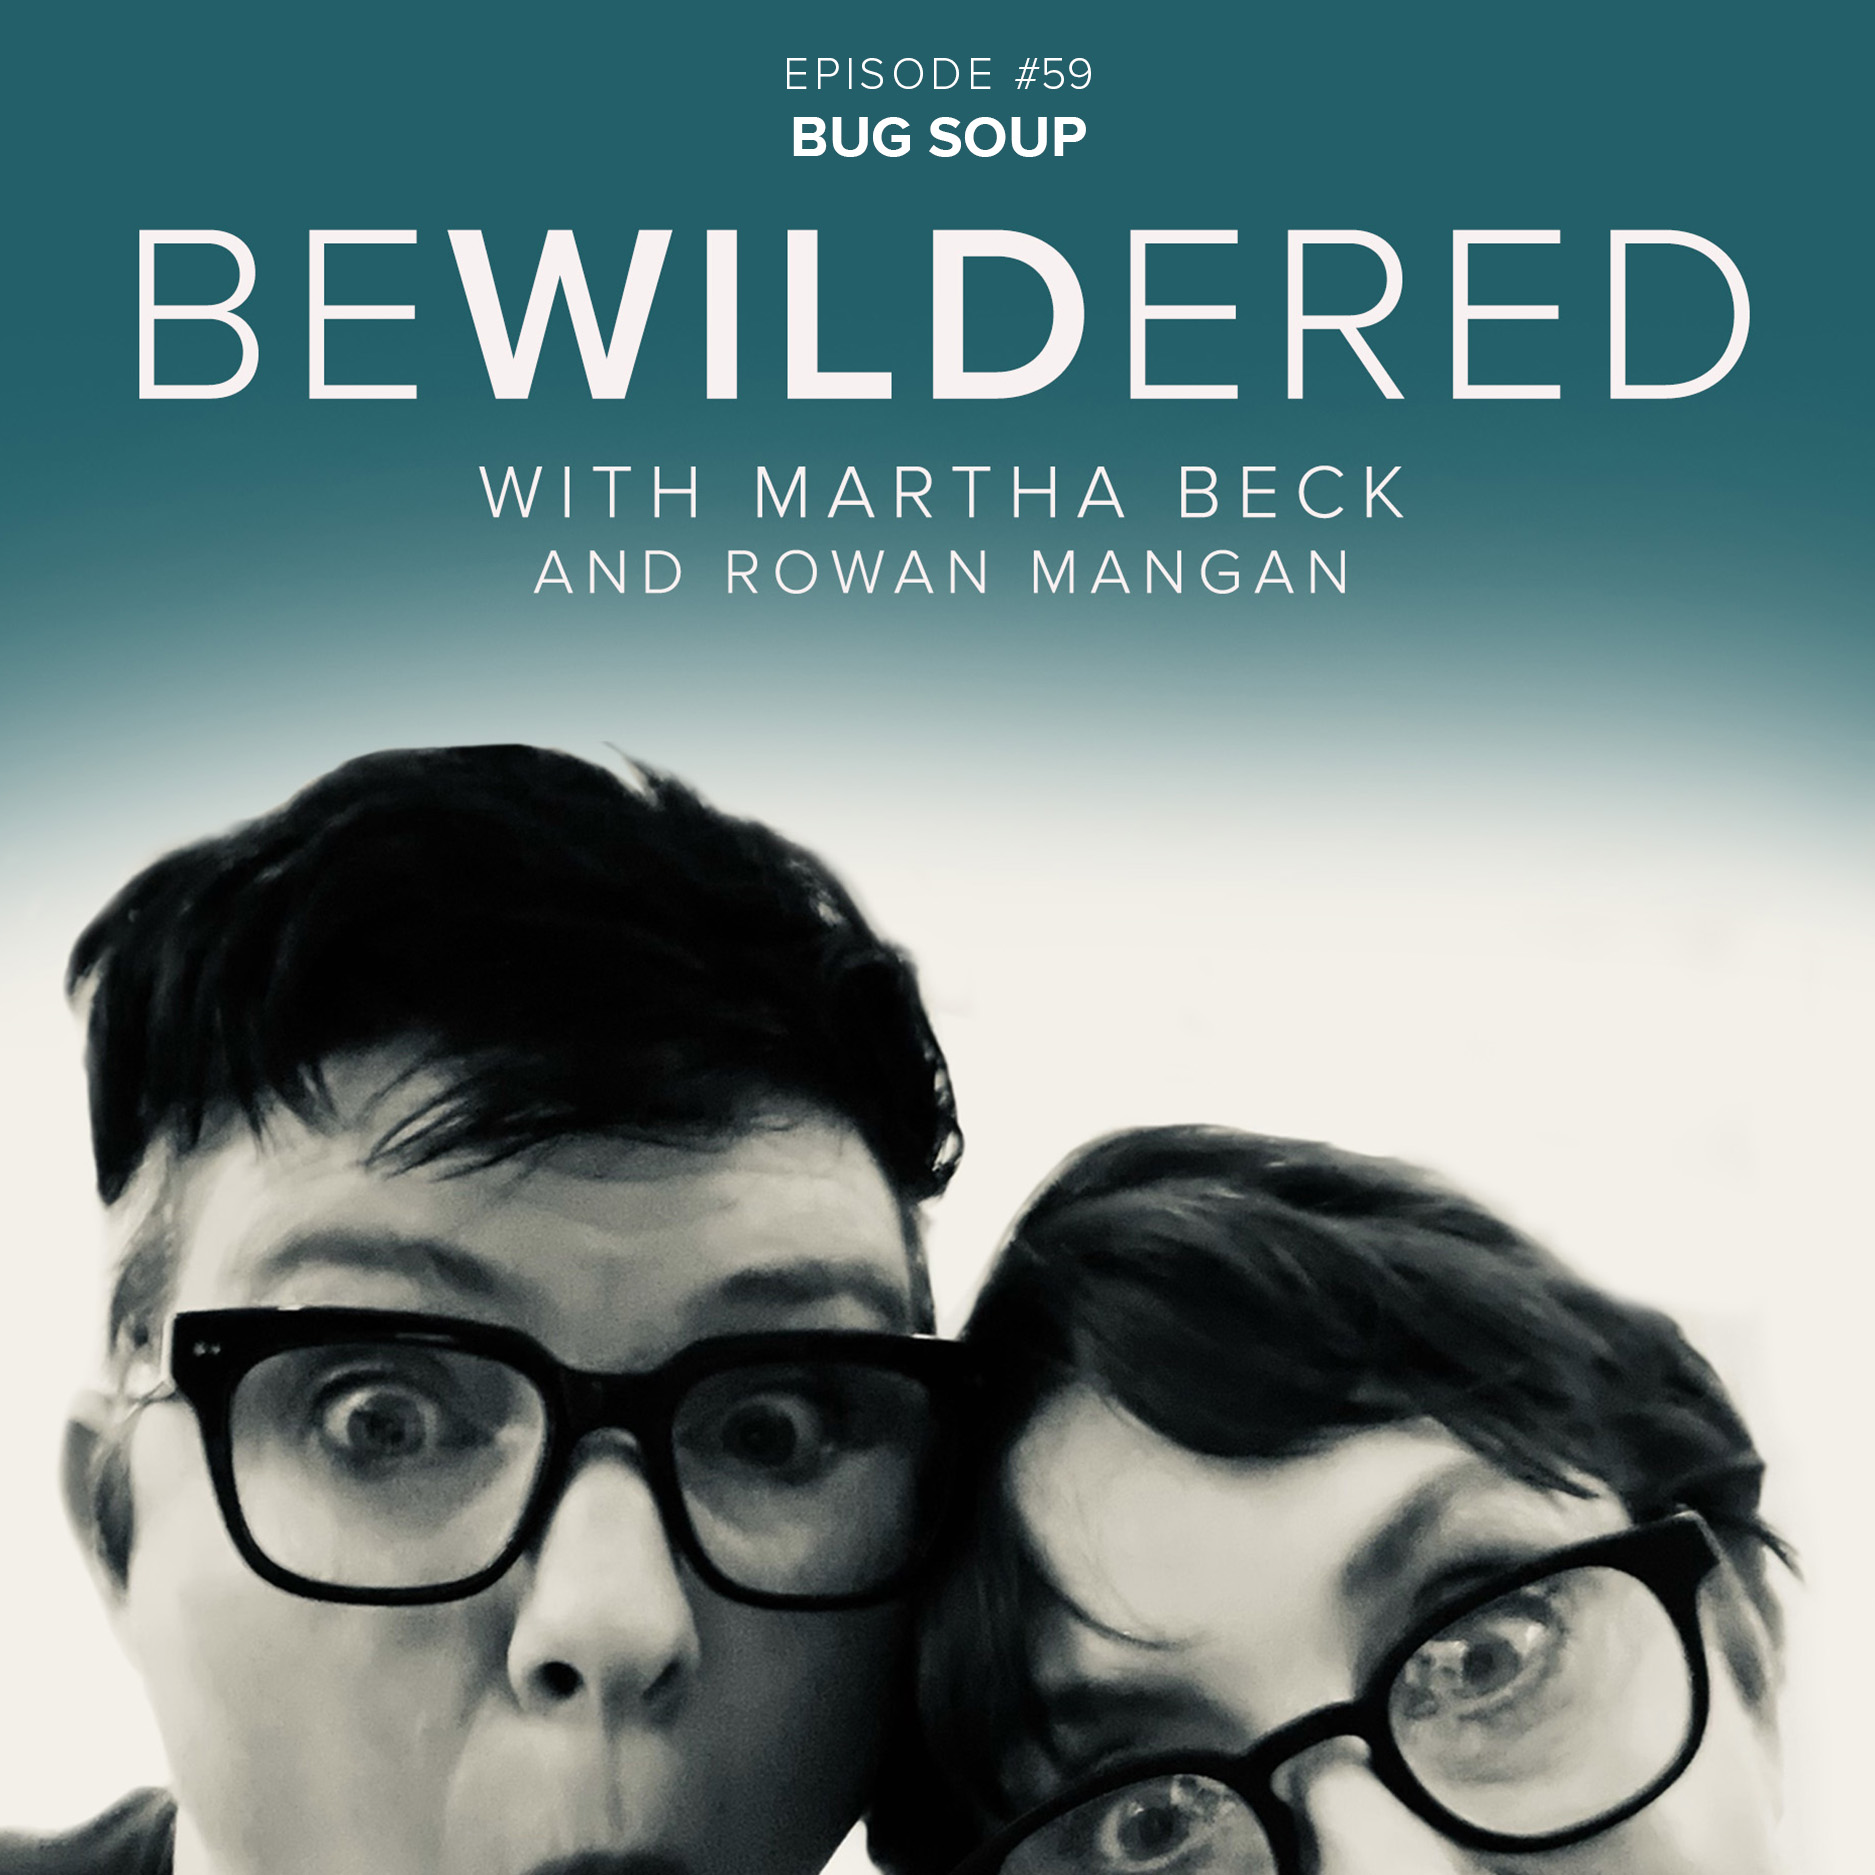 Image for Episode #59 Bug Soup for the Bewildered Podcast with Martha Beck and Rowan Mangan